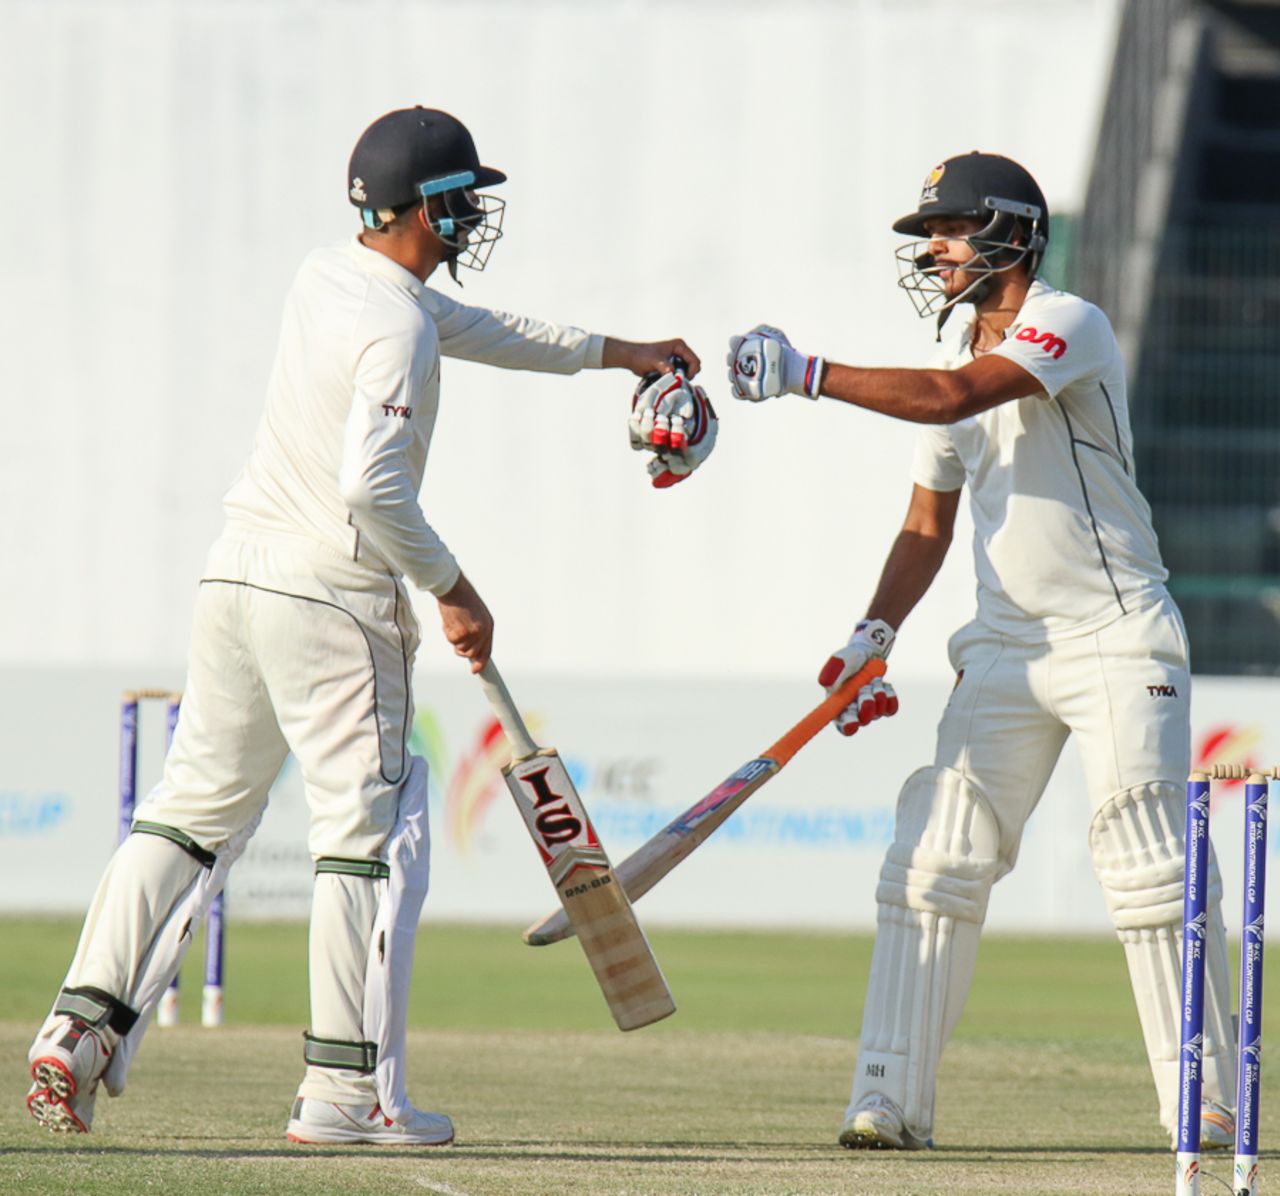 Rohan Mustafa and Chirag Suri shared a 146-run opening stand, UAE v Afghanistan, 2015-17 Intercontinental Cup, 3rd day, Abu Dhabi, December 1, 2017